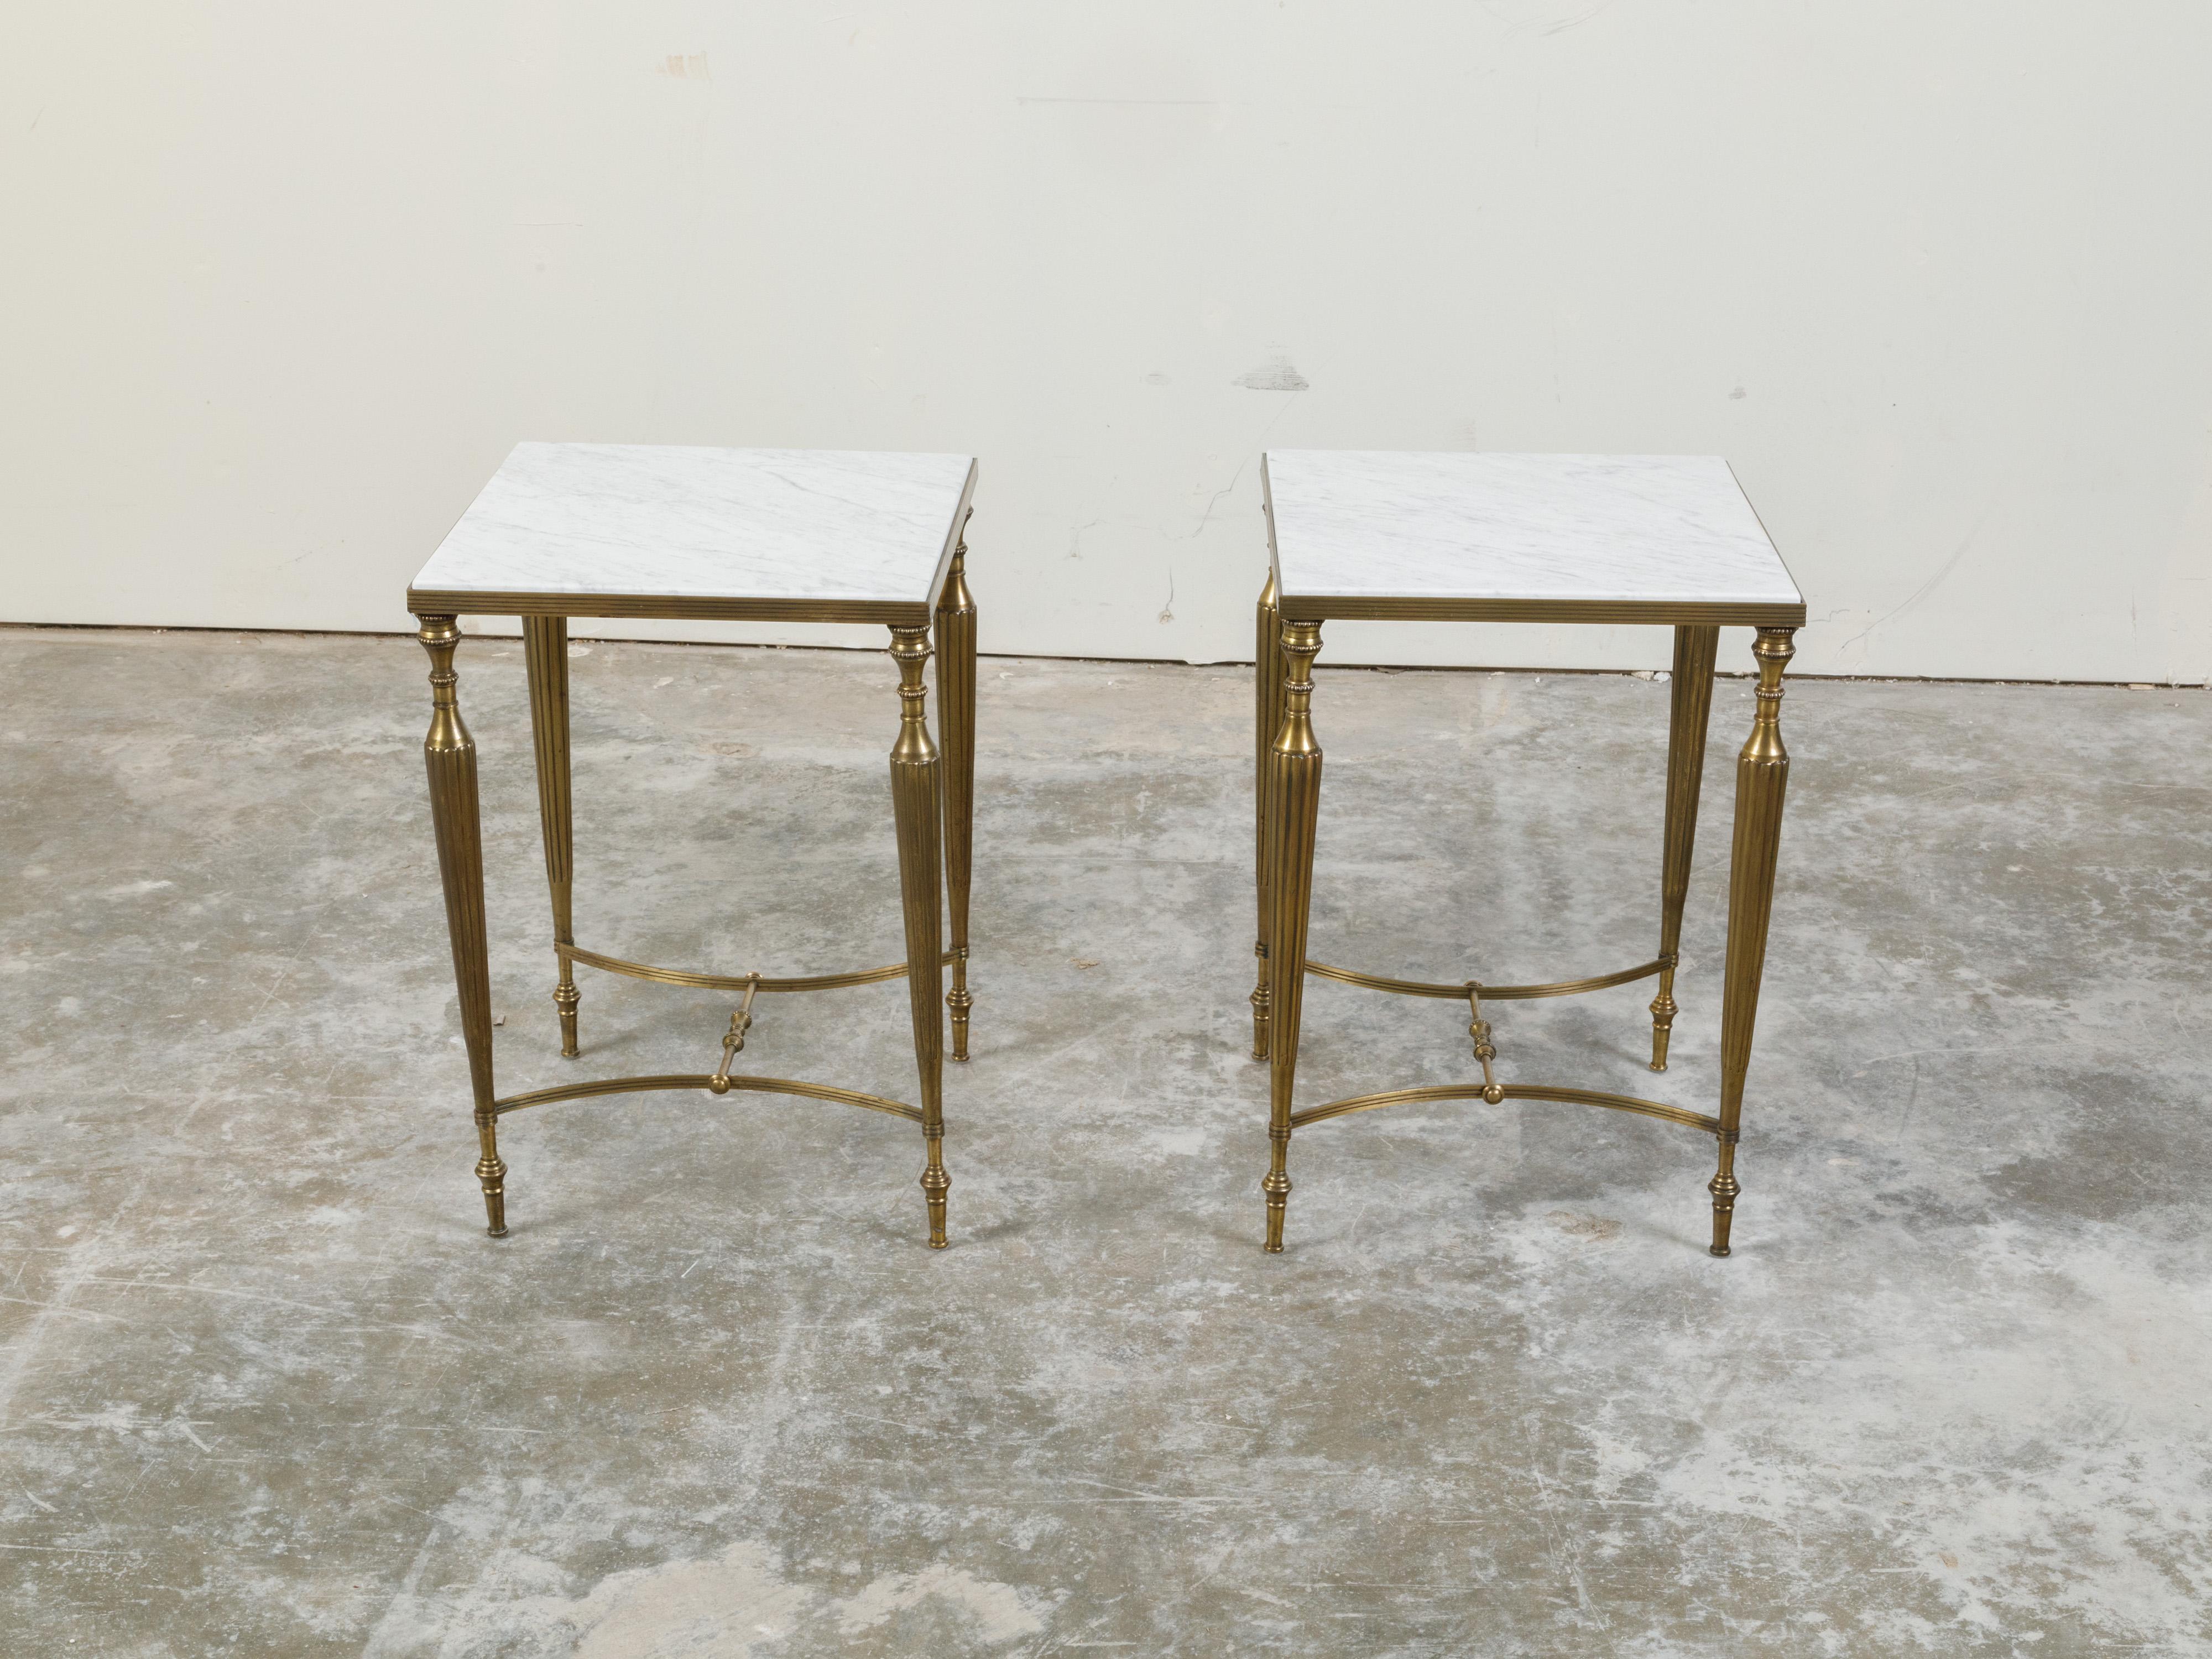 20th Century Pair of Midcentury Brass Side Tables with White Marble Tops and Reeded Legs